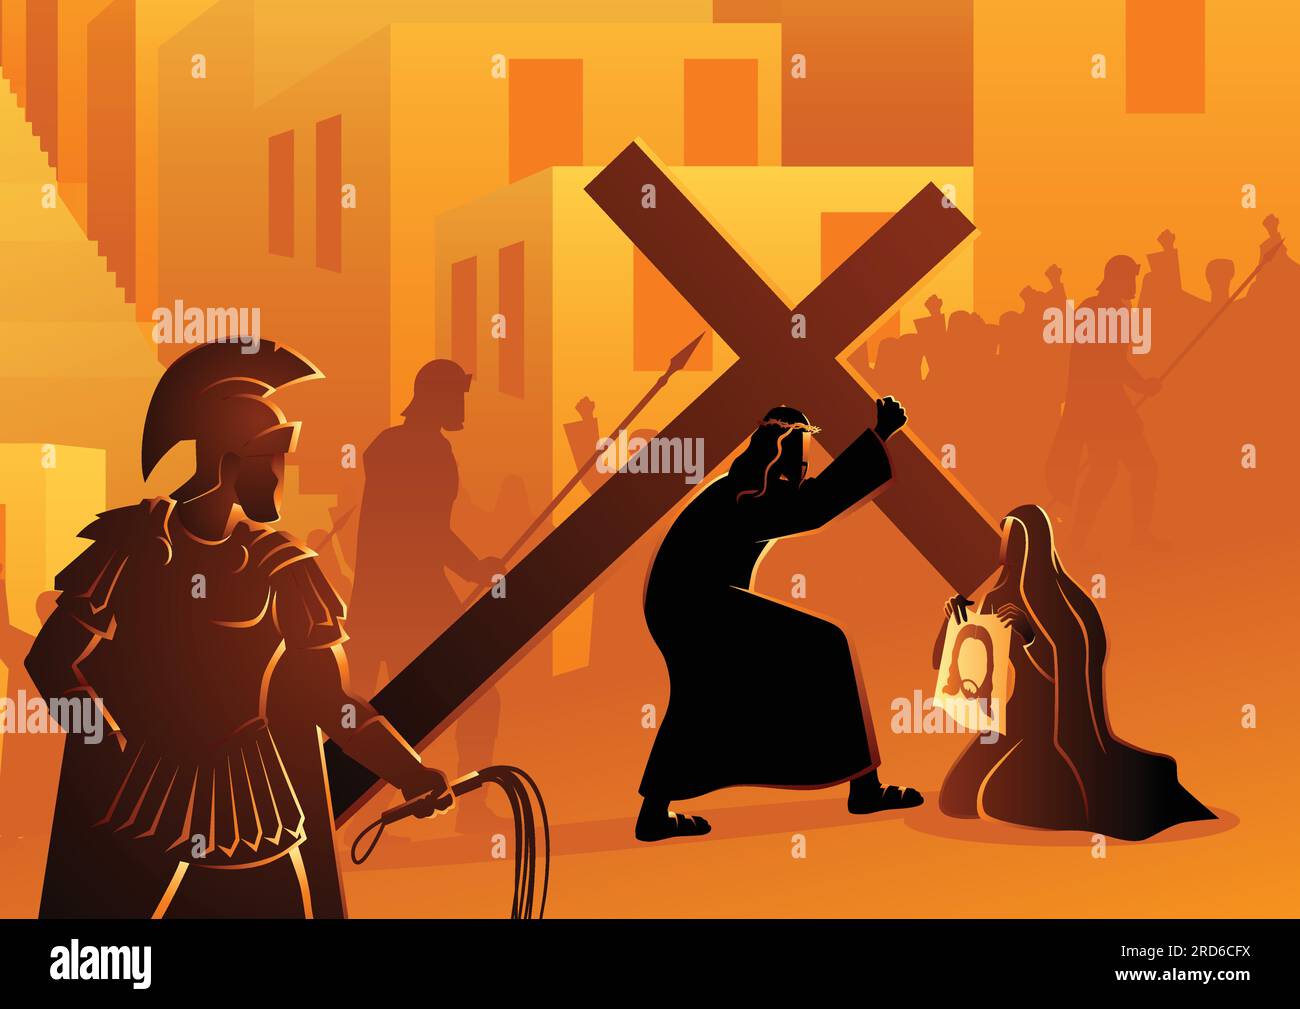 Biblical vector illustration series. Way of the Cross or Stations of the Cross, sixth station, Veronica wipes the face of Jesus. Stock Vector